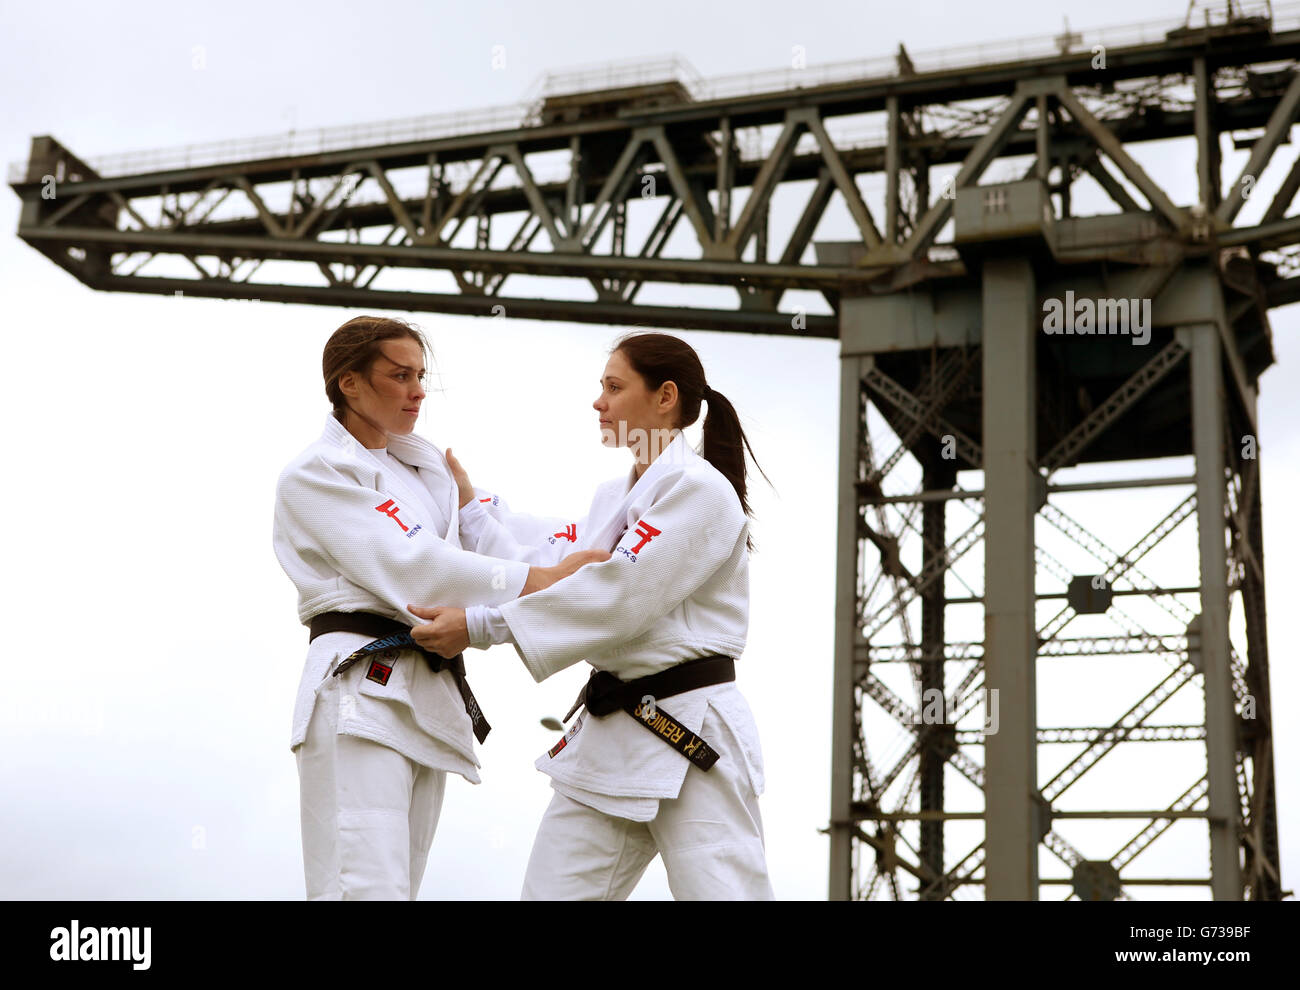 Scotland's Judo Athletes sisters (left) Kimberley and Louise Renicks beside the Finnieston Crane as they are announced as part of Team Scotlland for the Commonwealth Games during the photocall at The Hydro, Glasgow. PRESS ASSOCIATION Photo. Picture date: Wednesday May 28, 2014. See PA story SPORT Scotland. Photo credit should read: Andrew Milligan/PA Wire Stock Photo